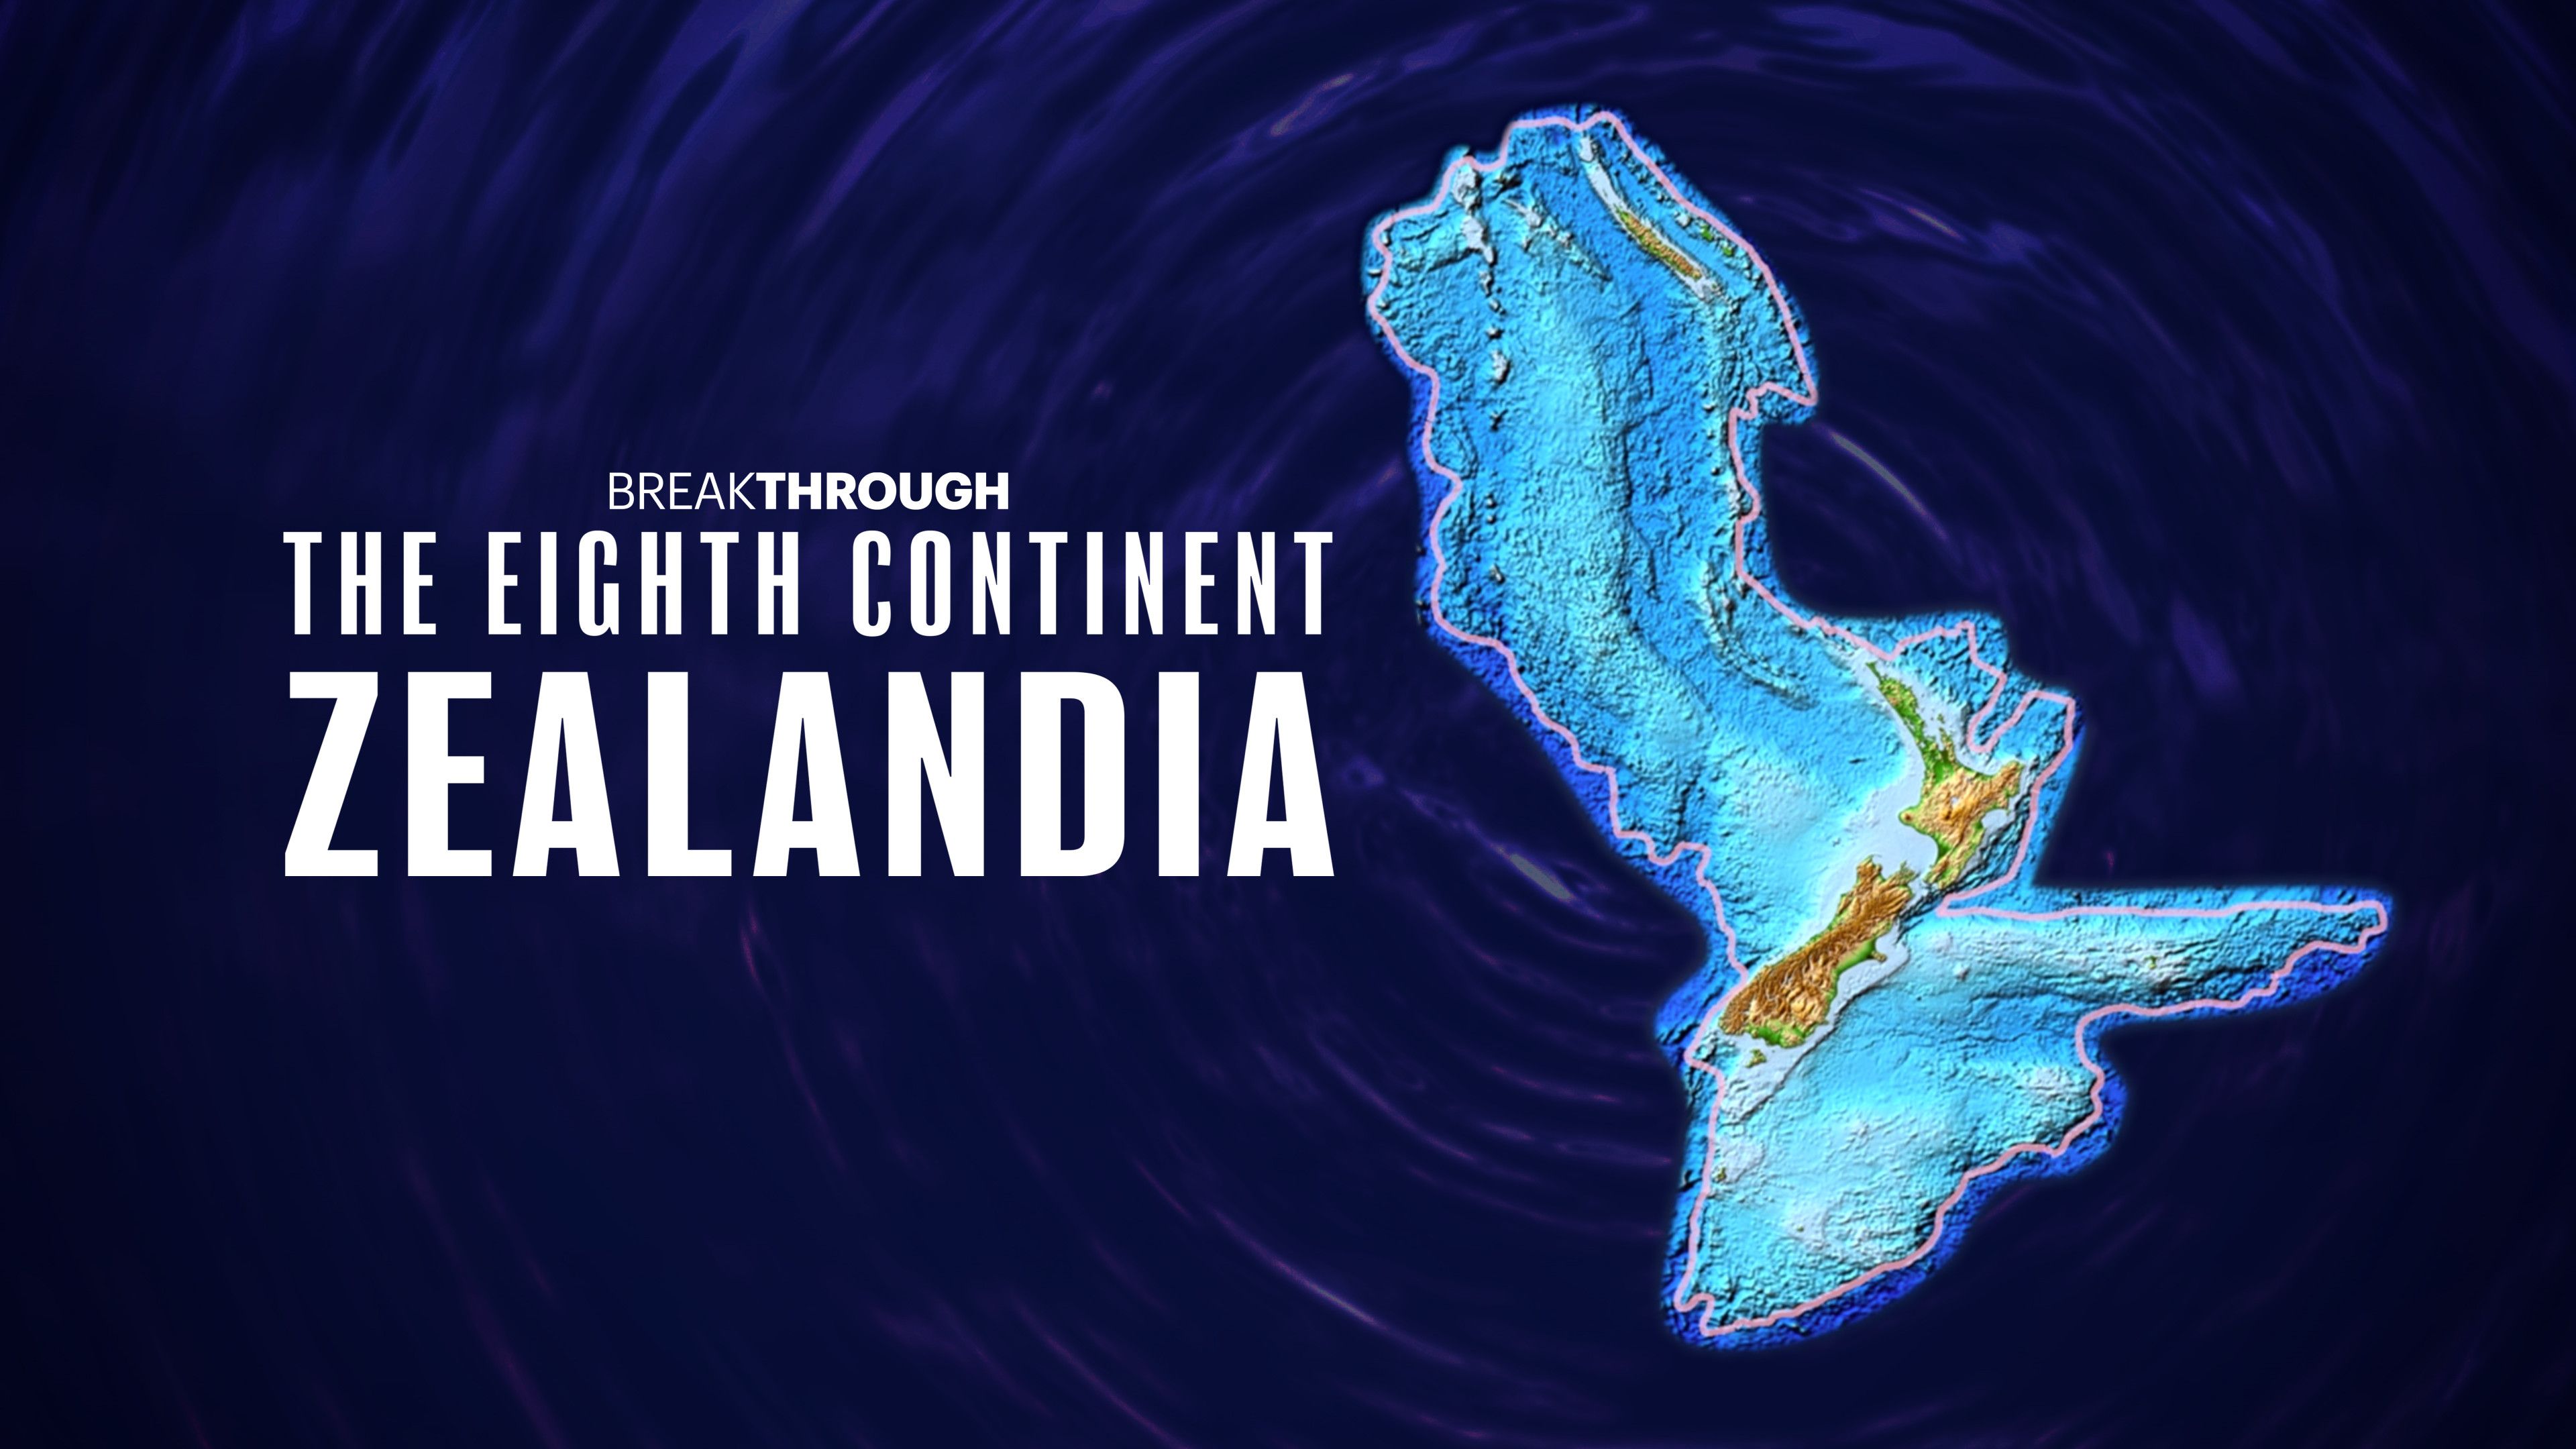 The Eighth Continent: Zealandia